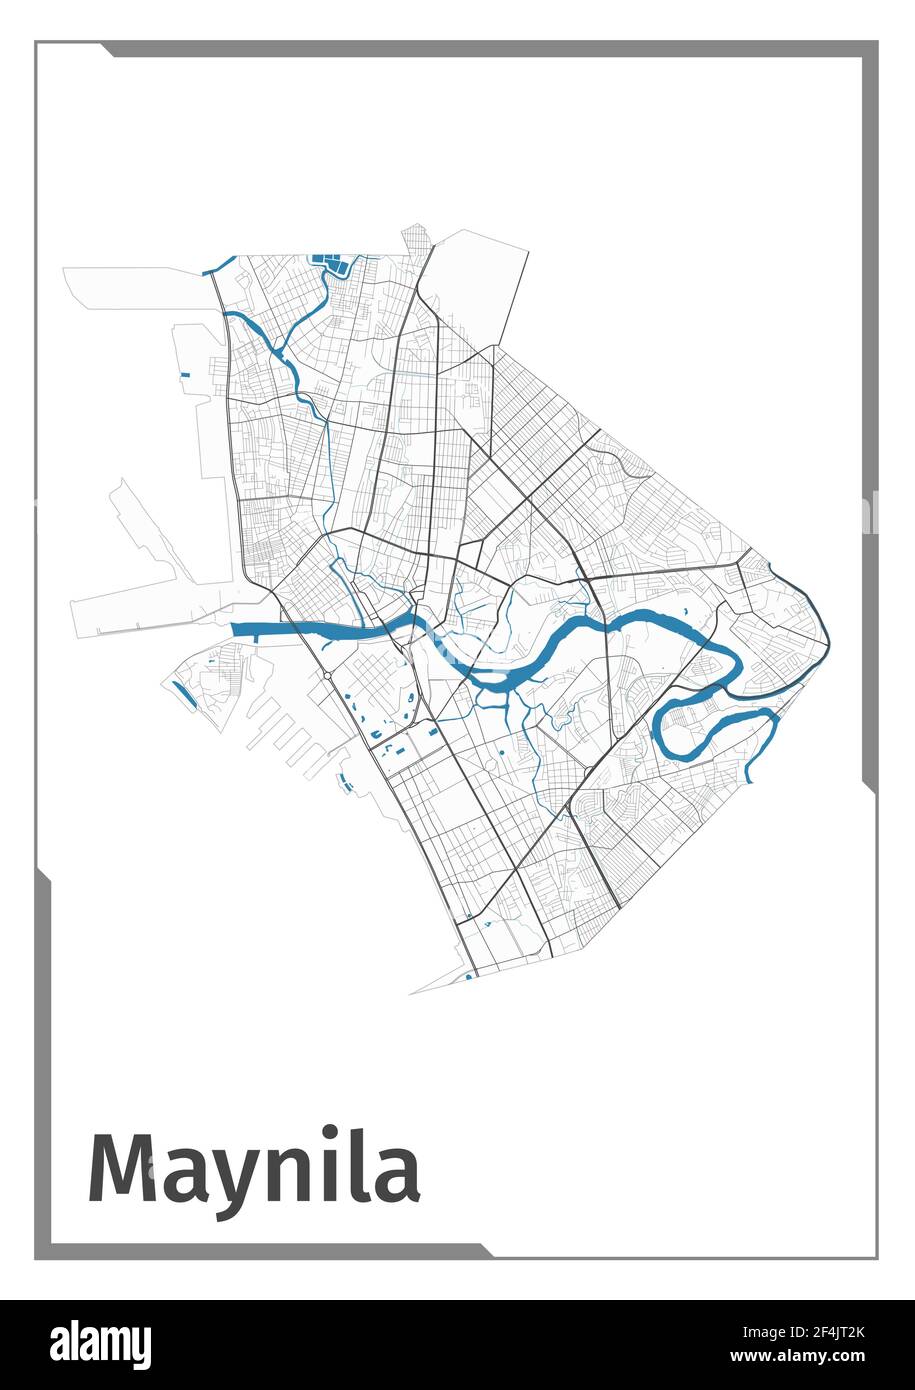 Manila map poster, administrative area plan view. Black, white and blue detailed design map of Manila city with rivers and streets. Outline silhouette Stock Vector